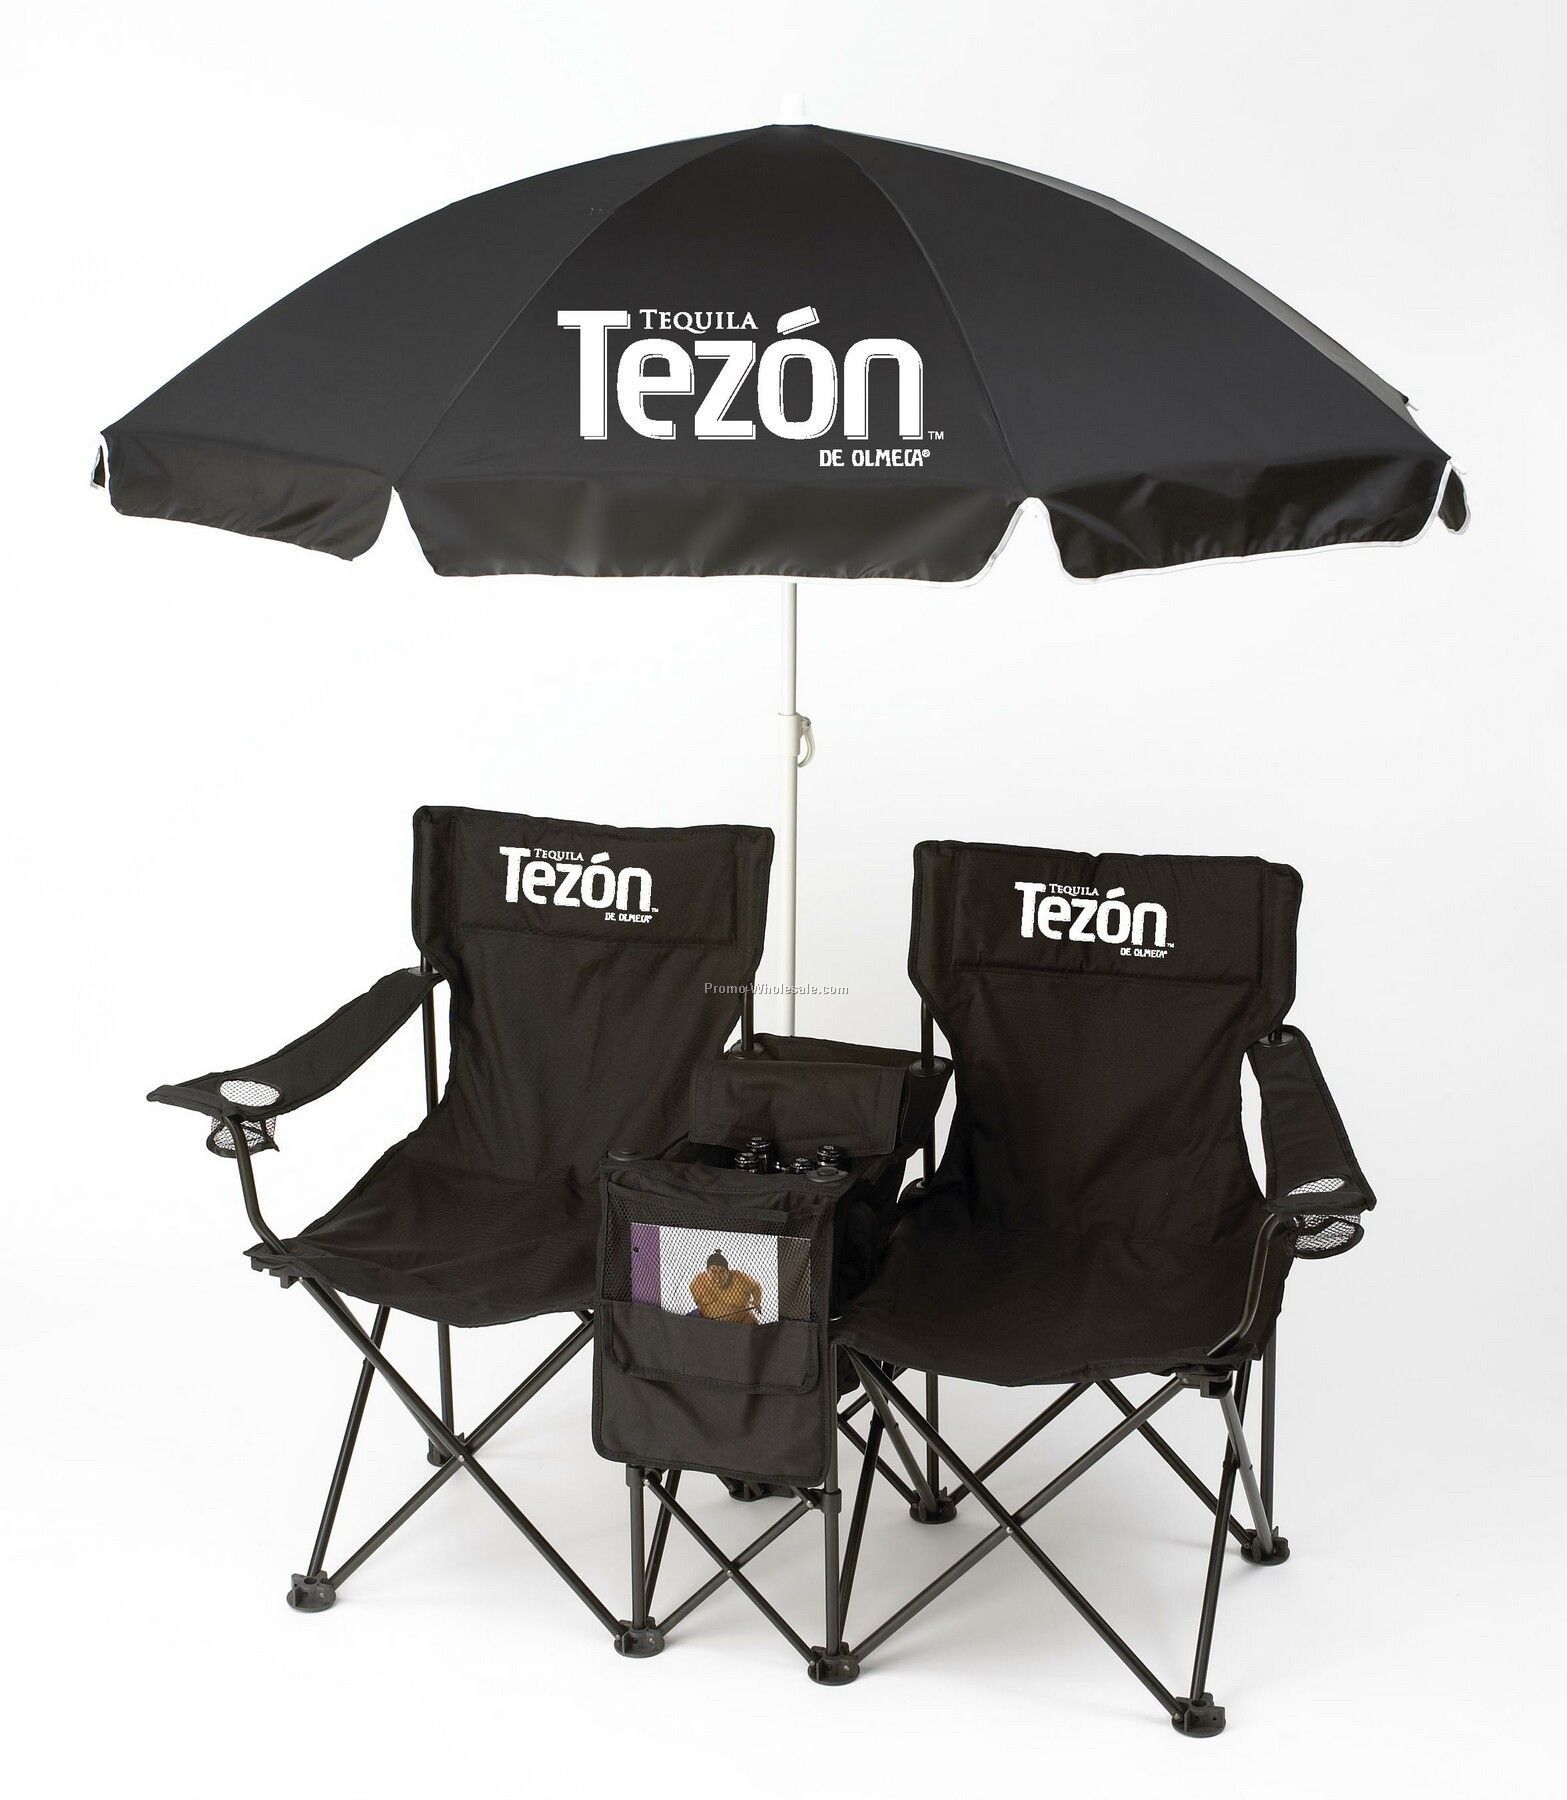 Double-Chair-Set-With-Umbrella_20090656574.jpg